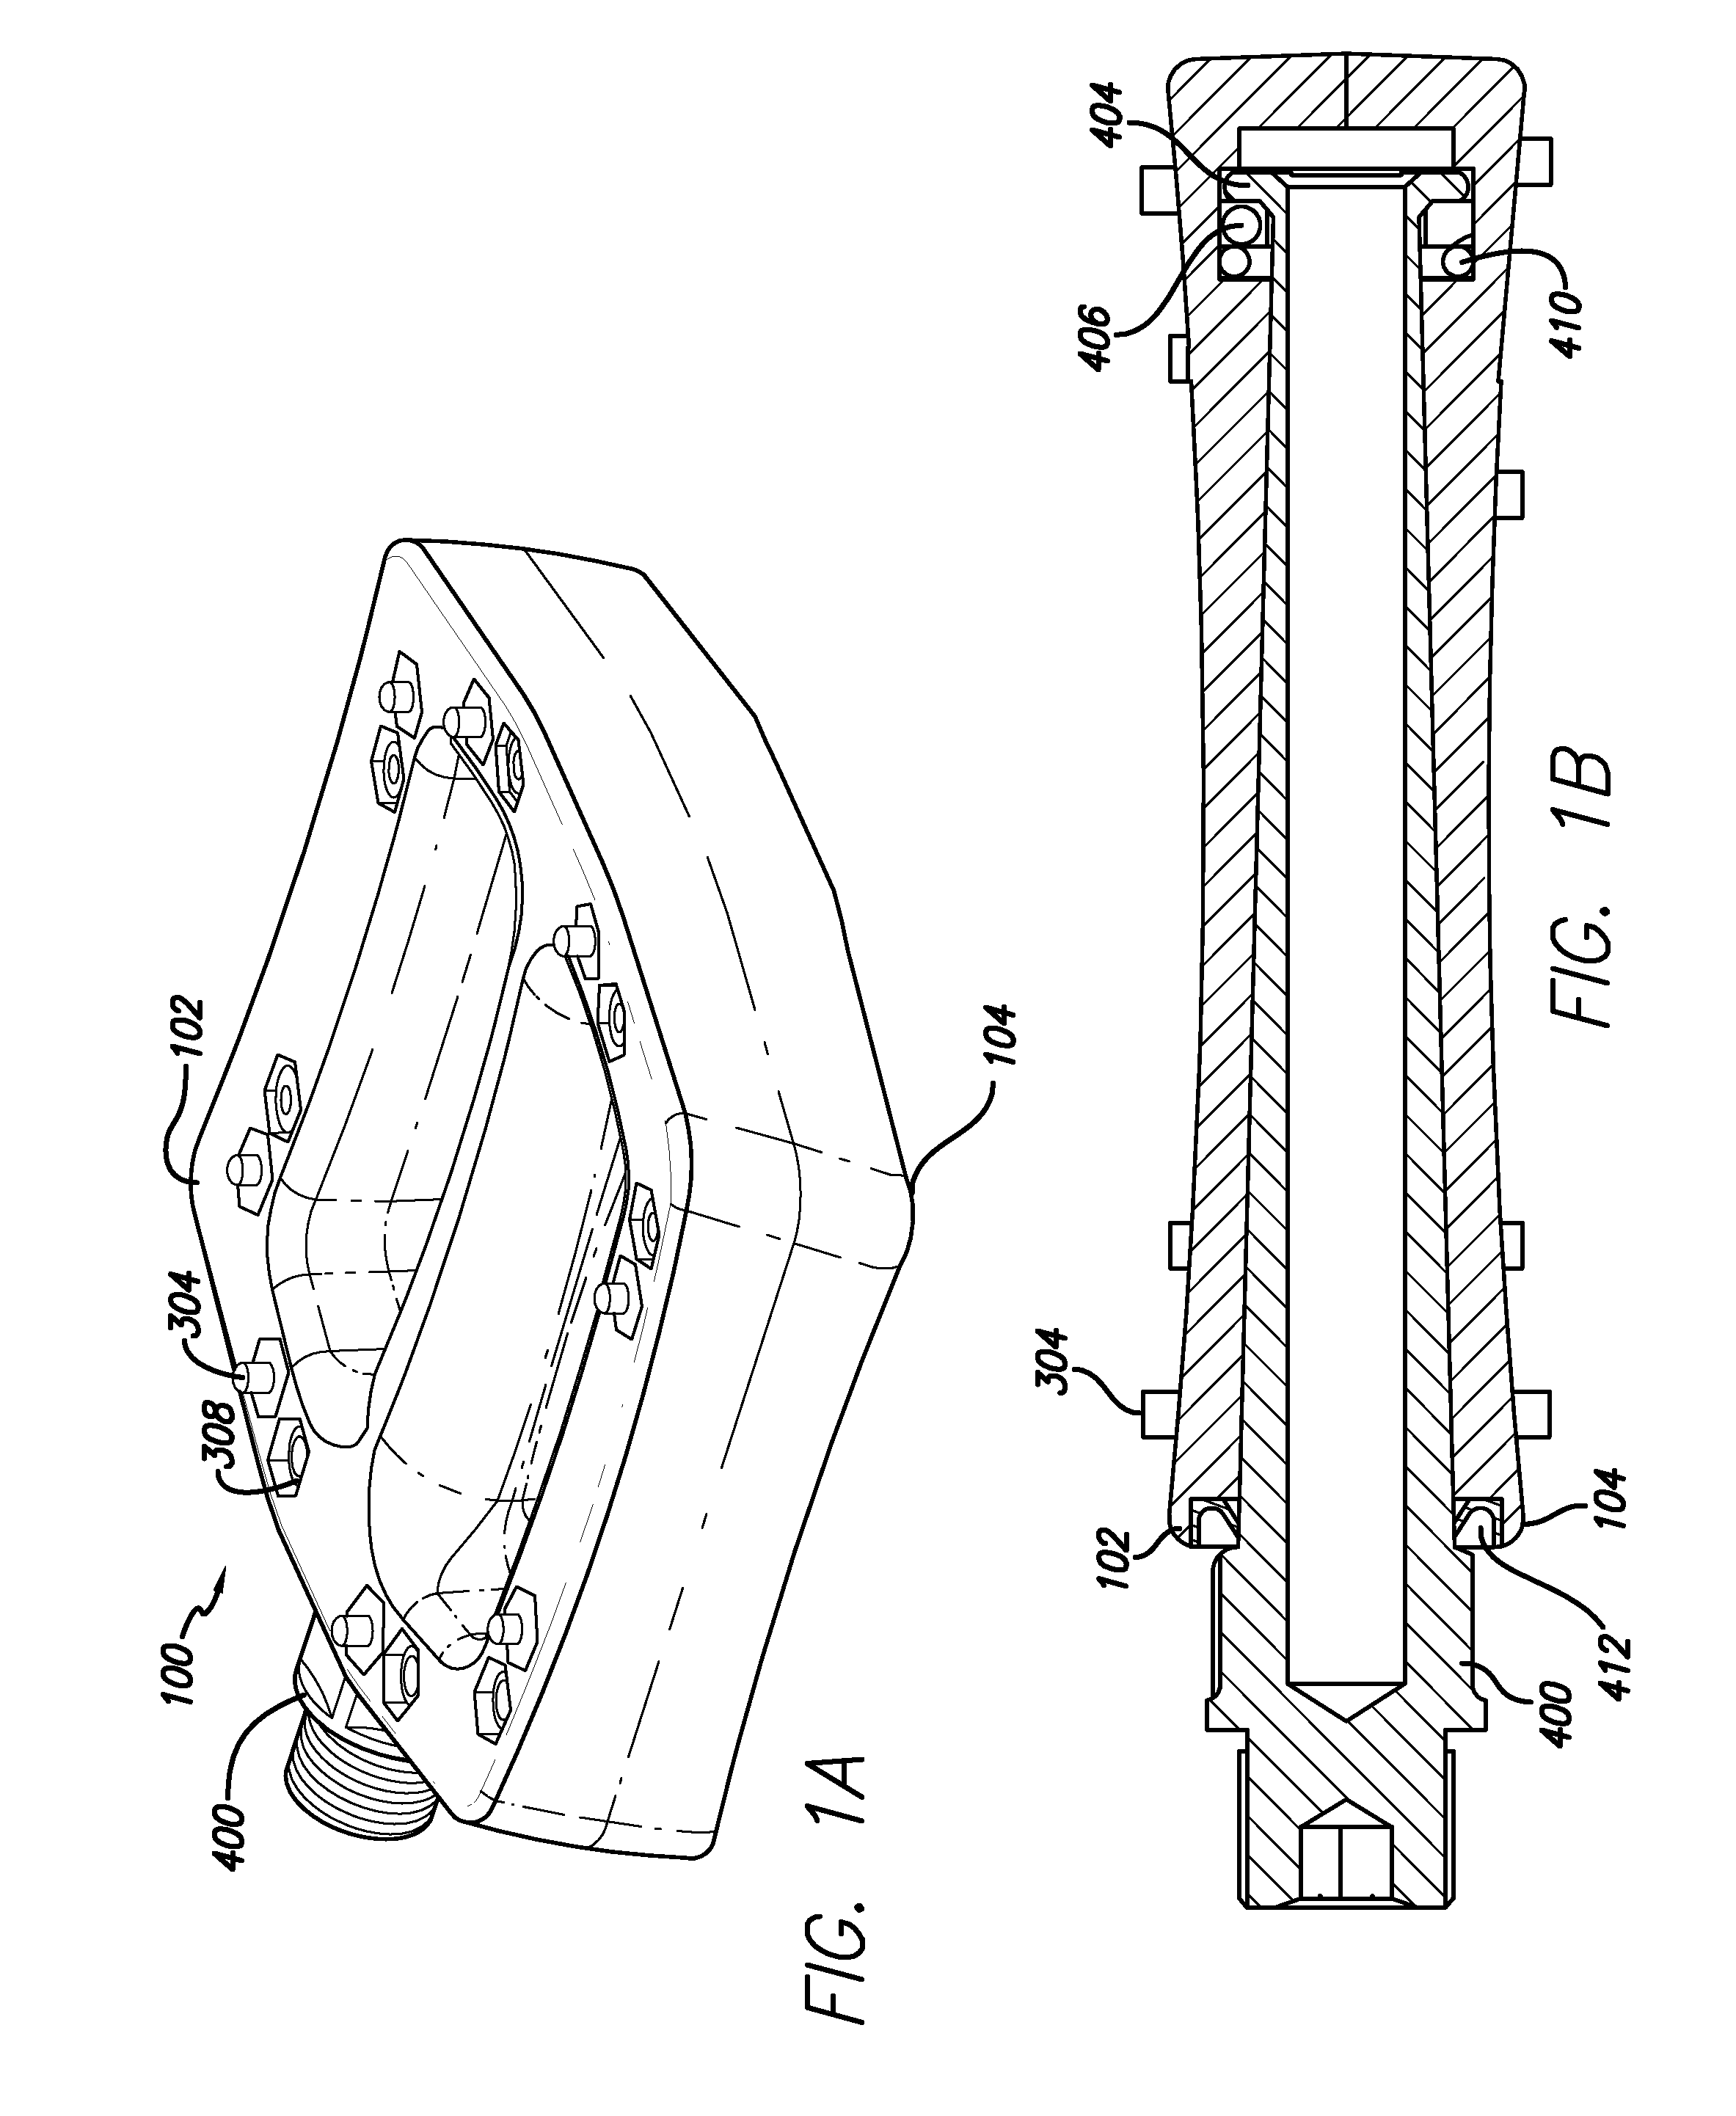 Bicycle pedal